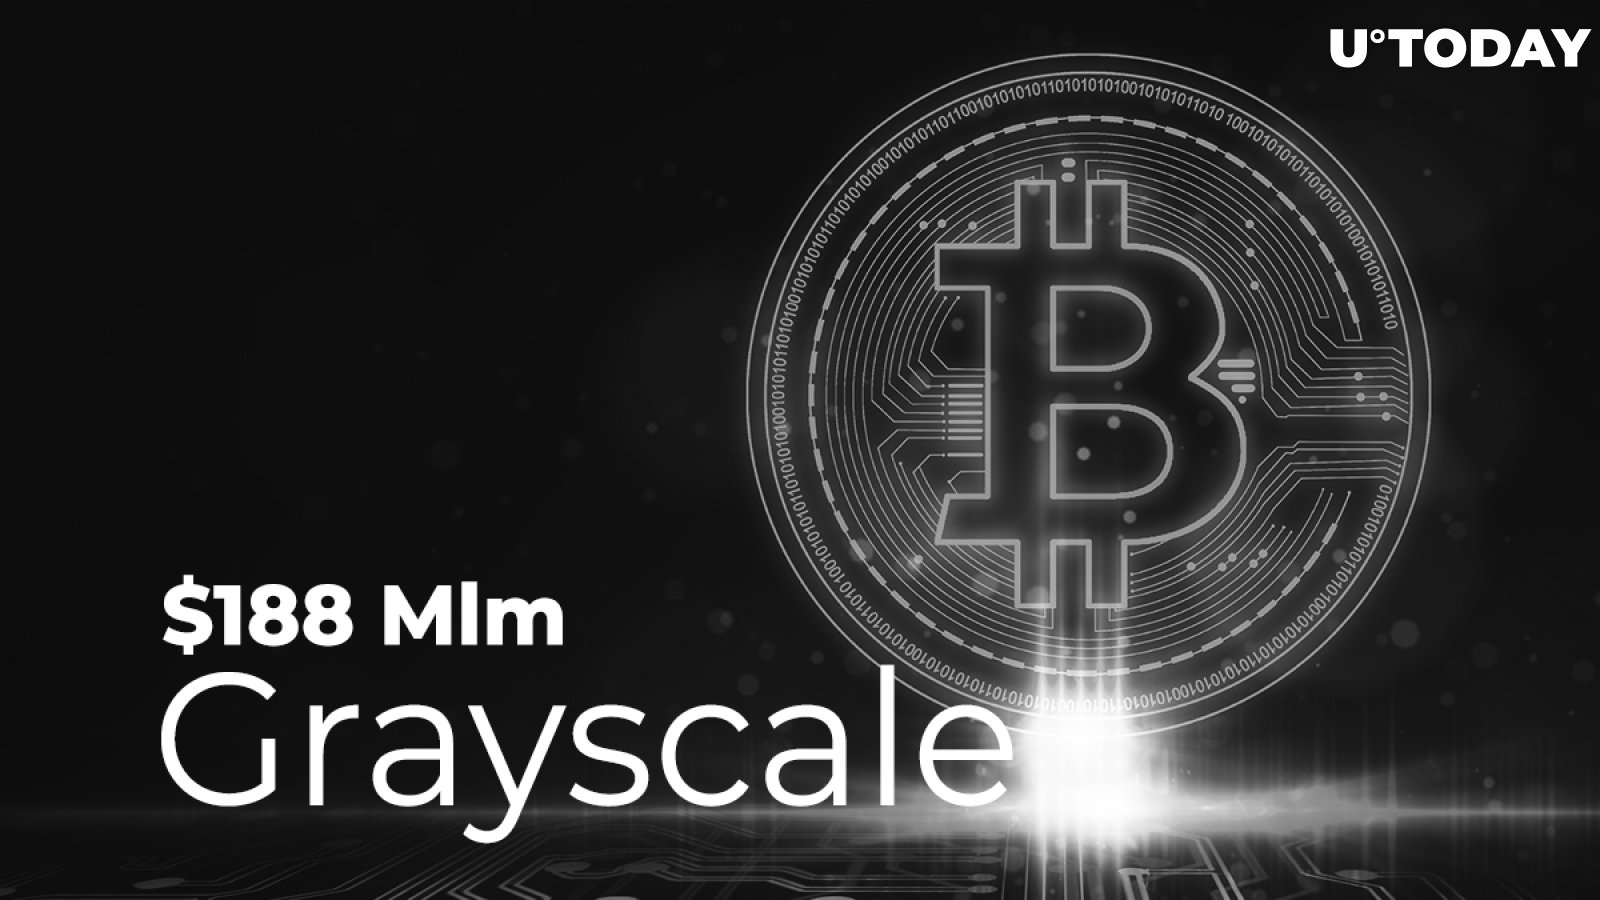 Grayscale Acquires Over $188 Mln Worth of Bitcoin in One Day